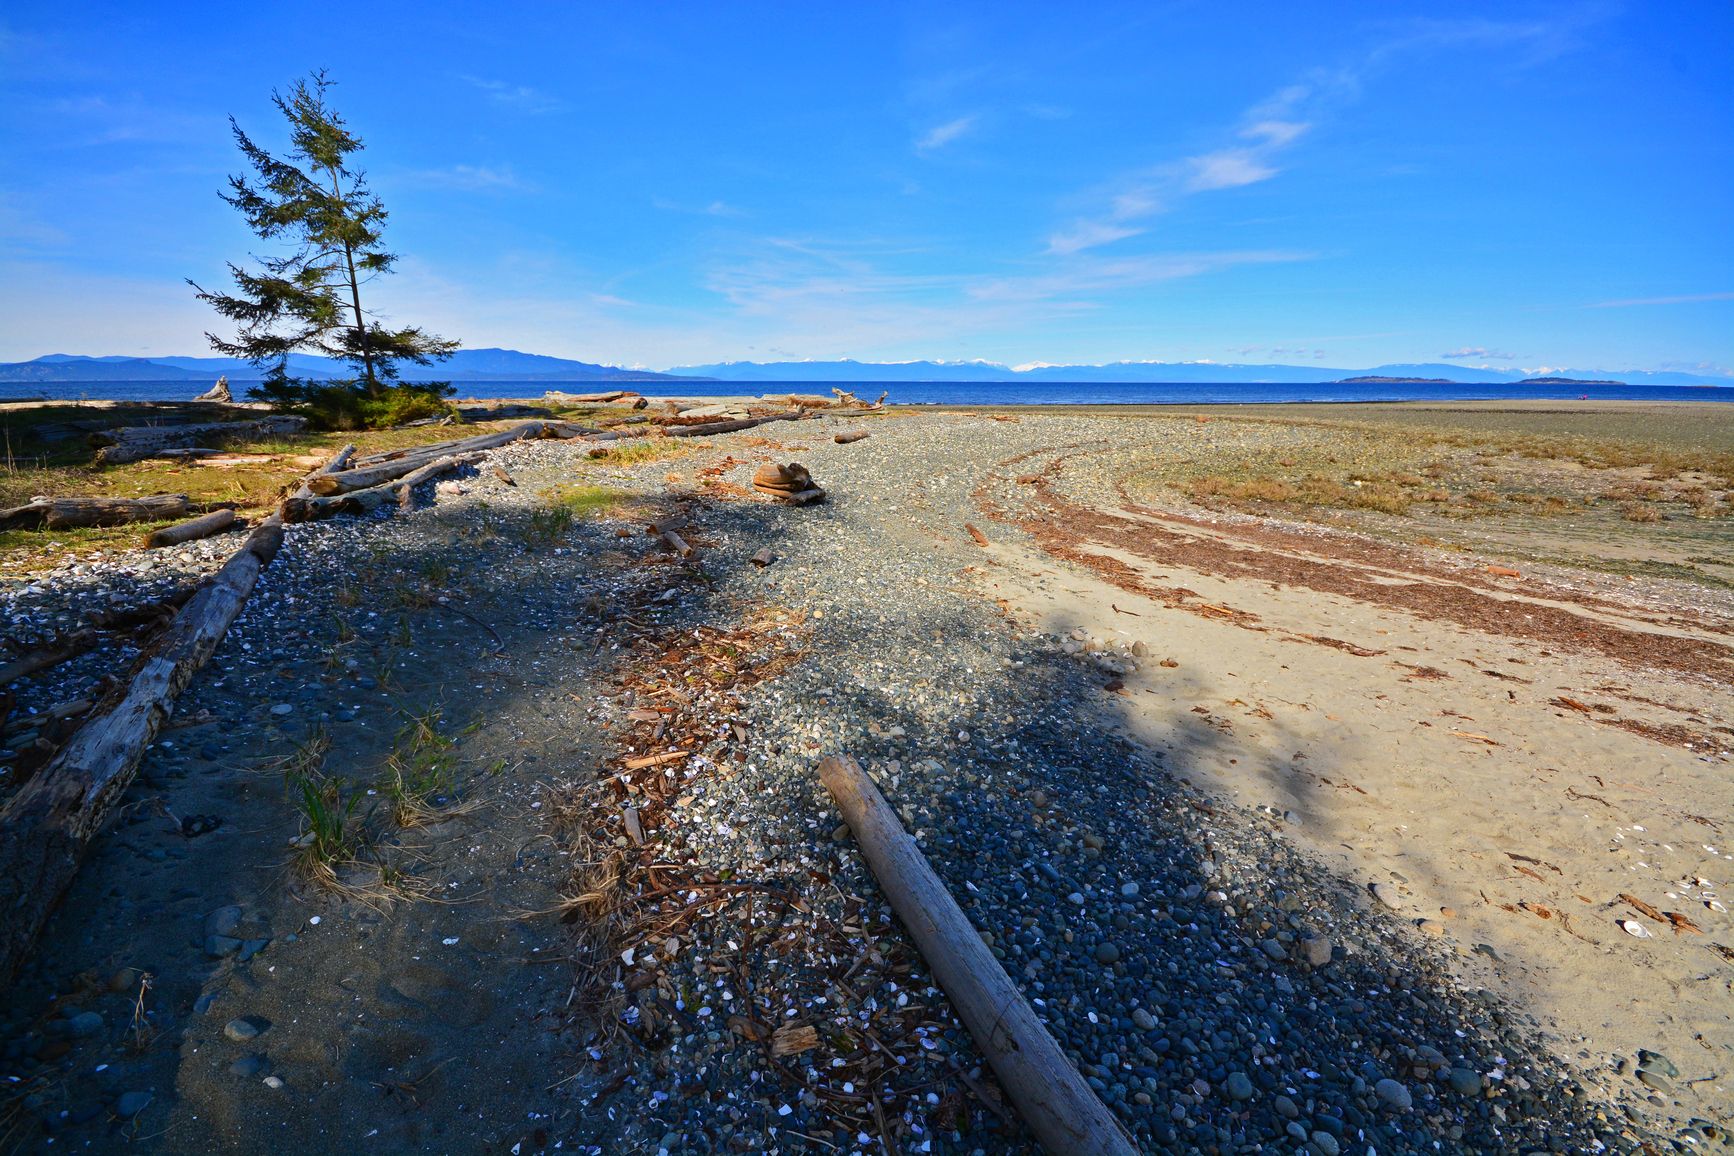 A view of the beach and mountains from the berm. Rathtrevor Beach Park.